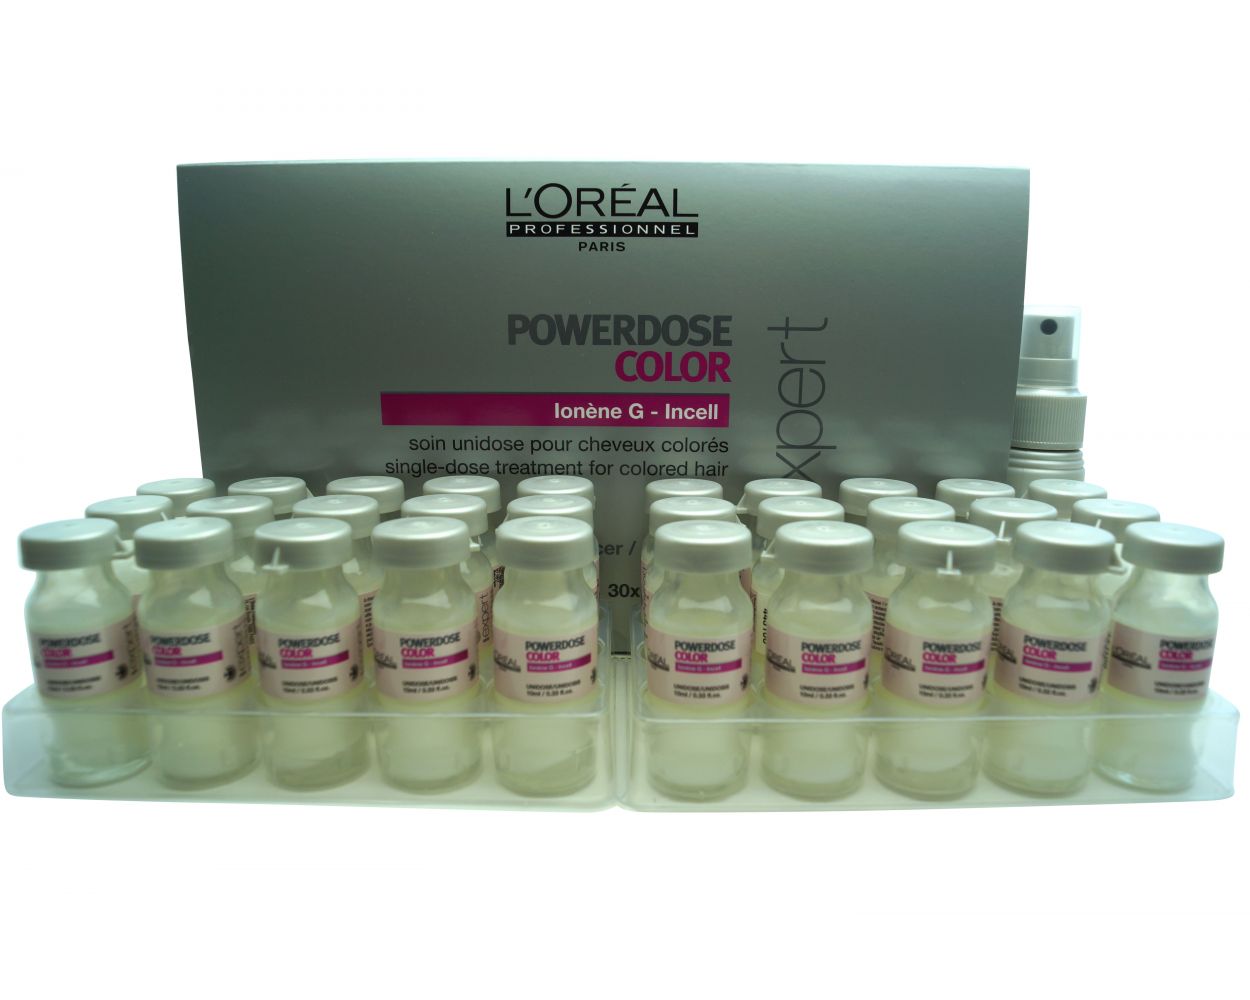 L'Oreal Professional Powerdose Hair Product | Conditioner 